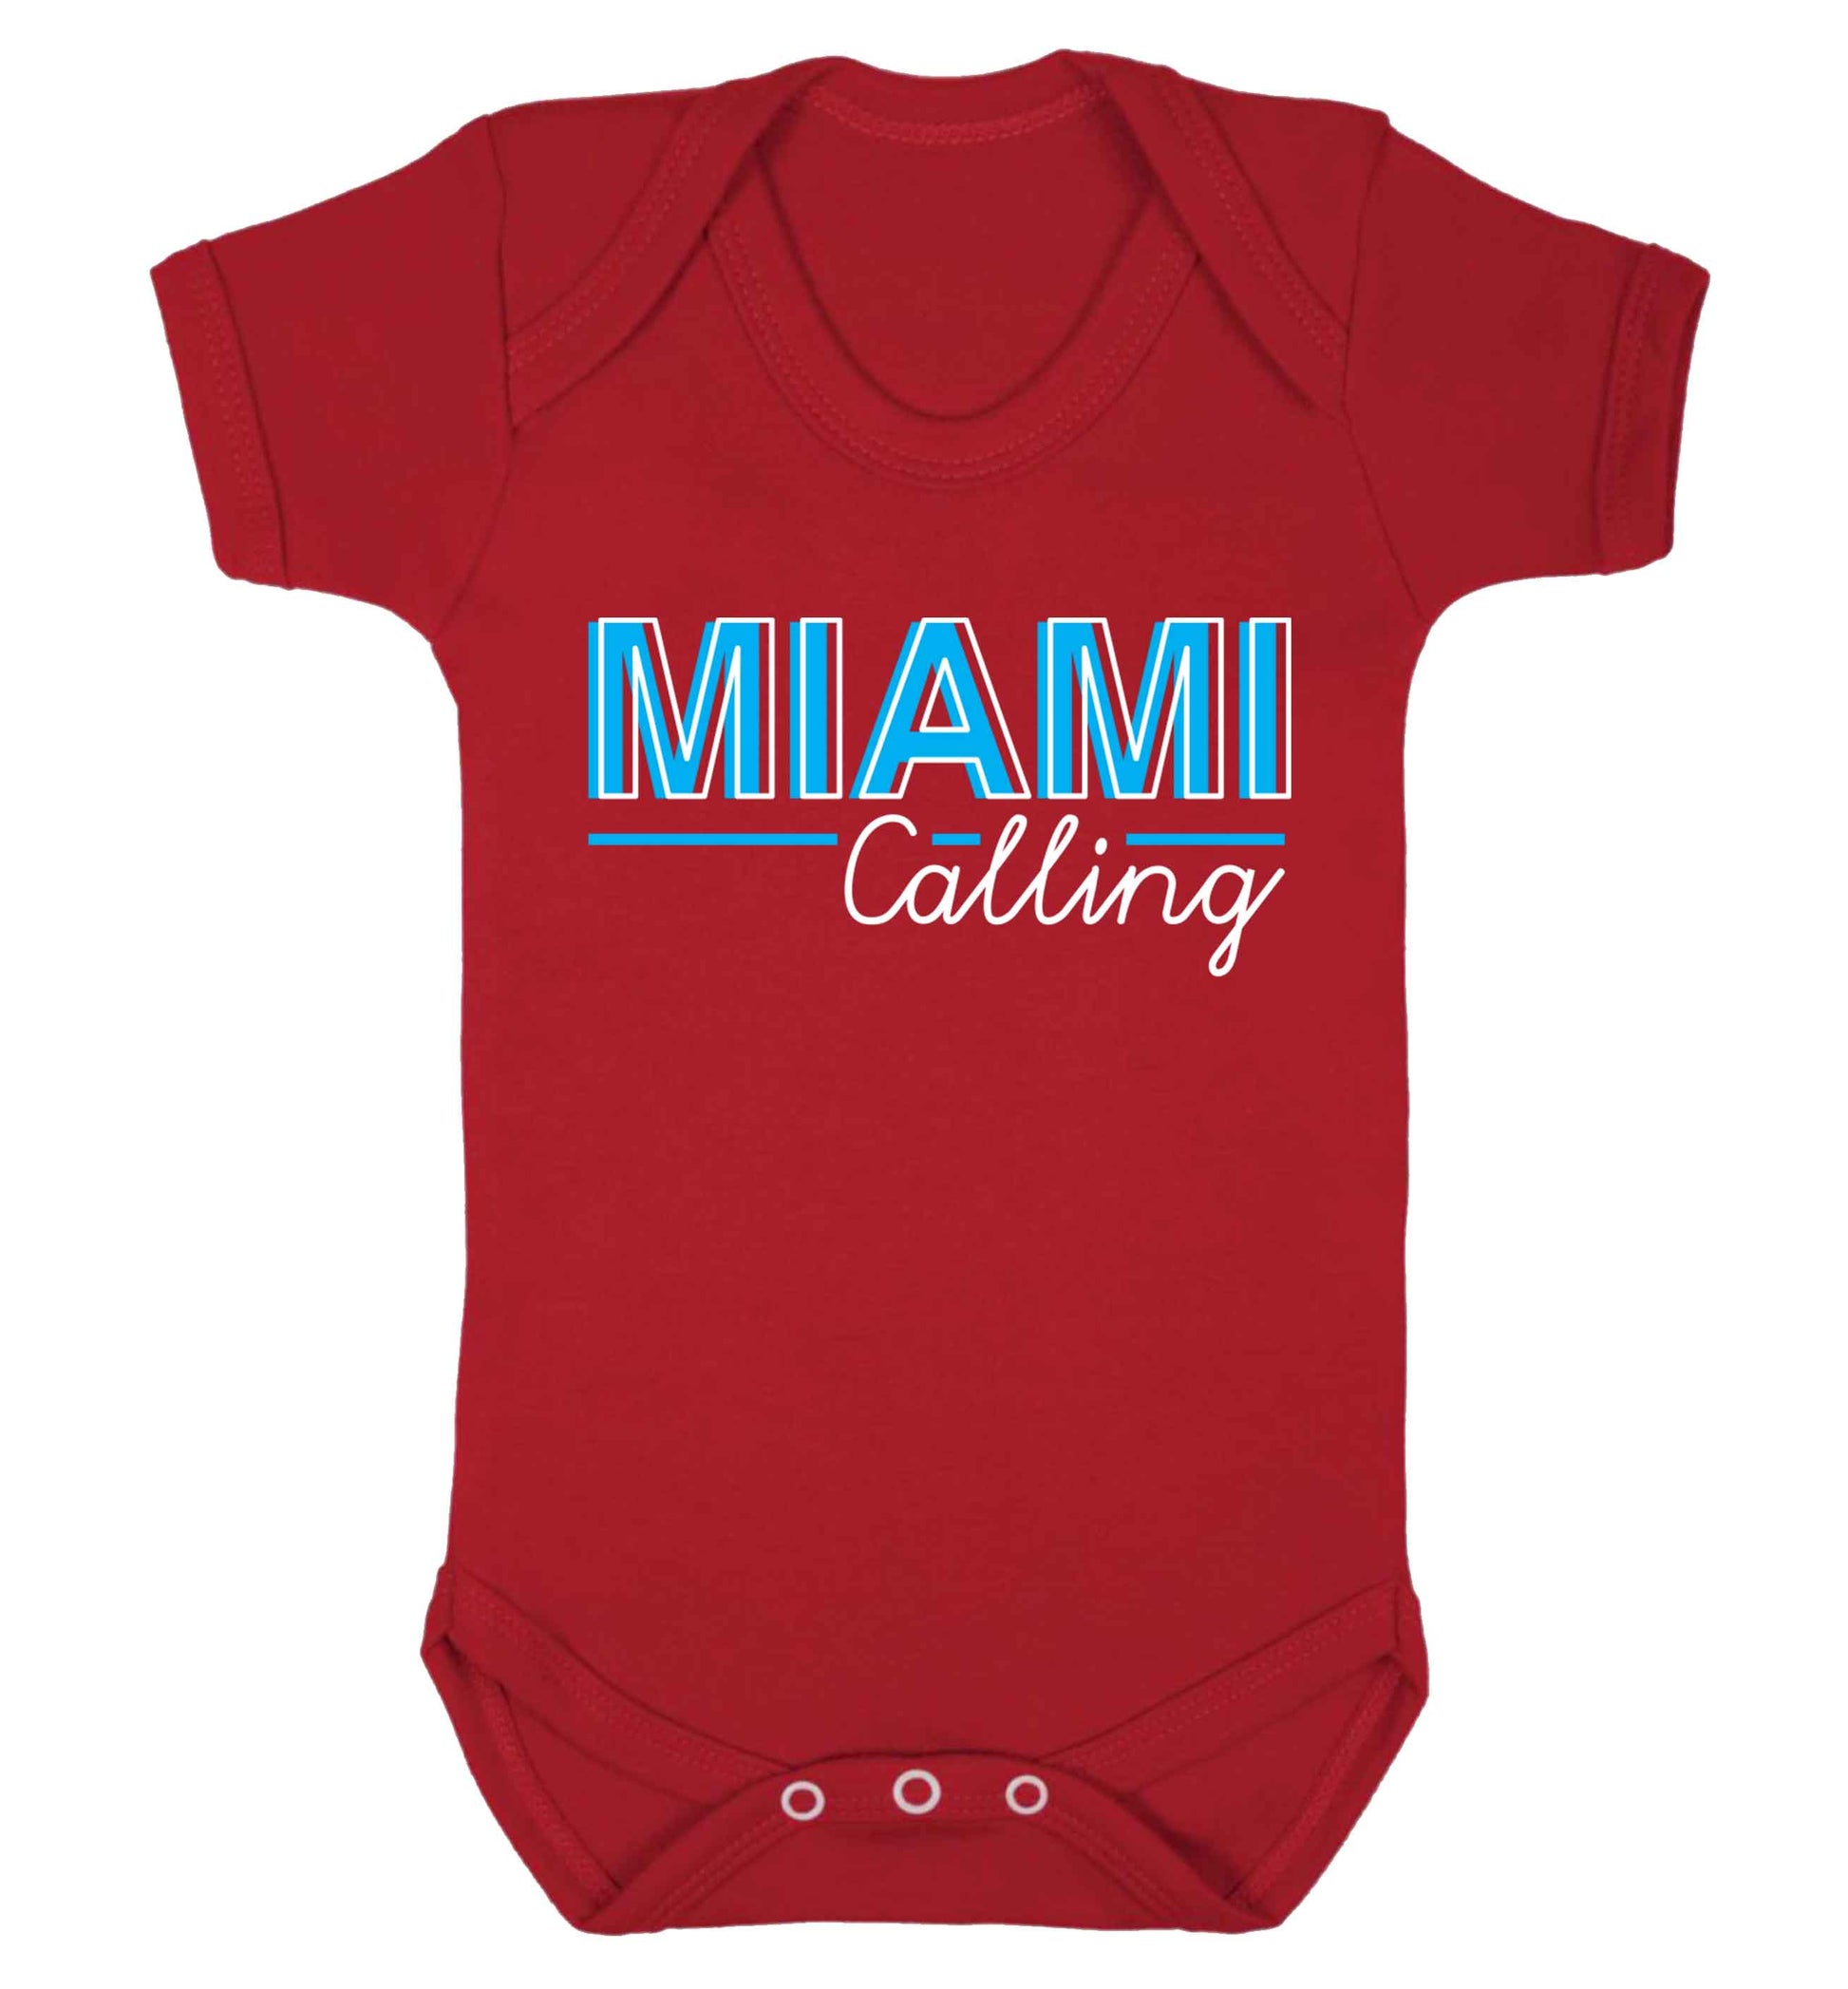 Miami calling Baby Vest red 18-24 months